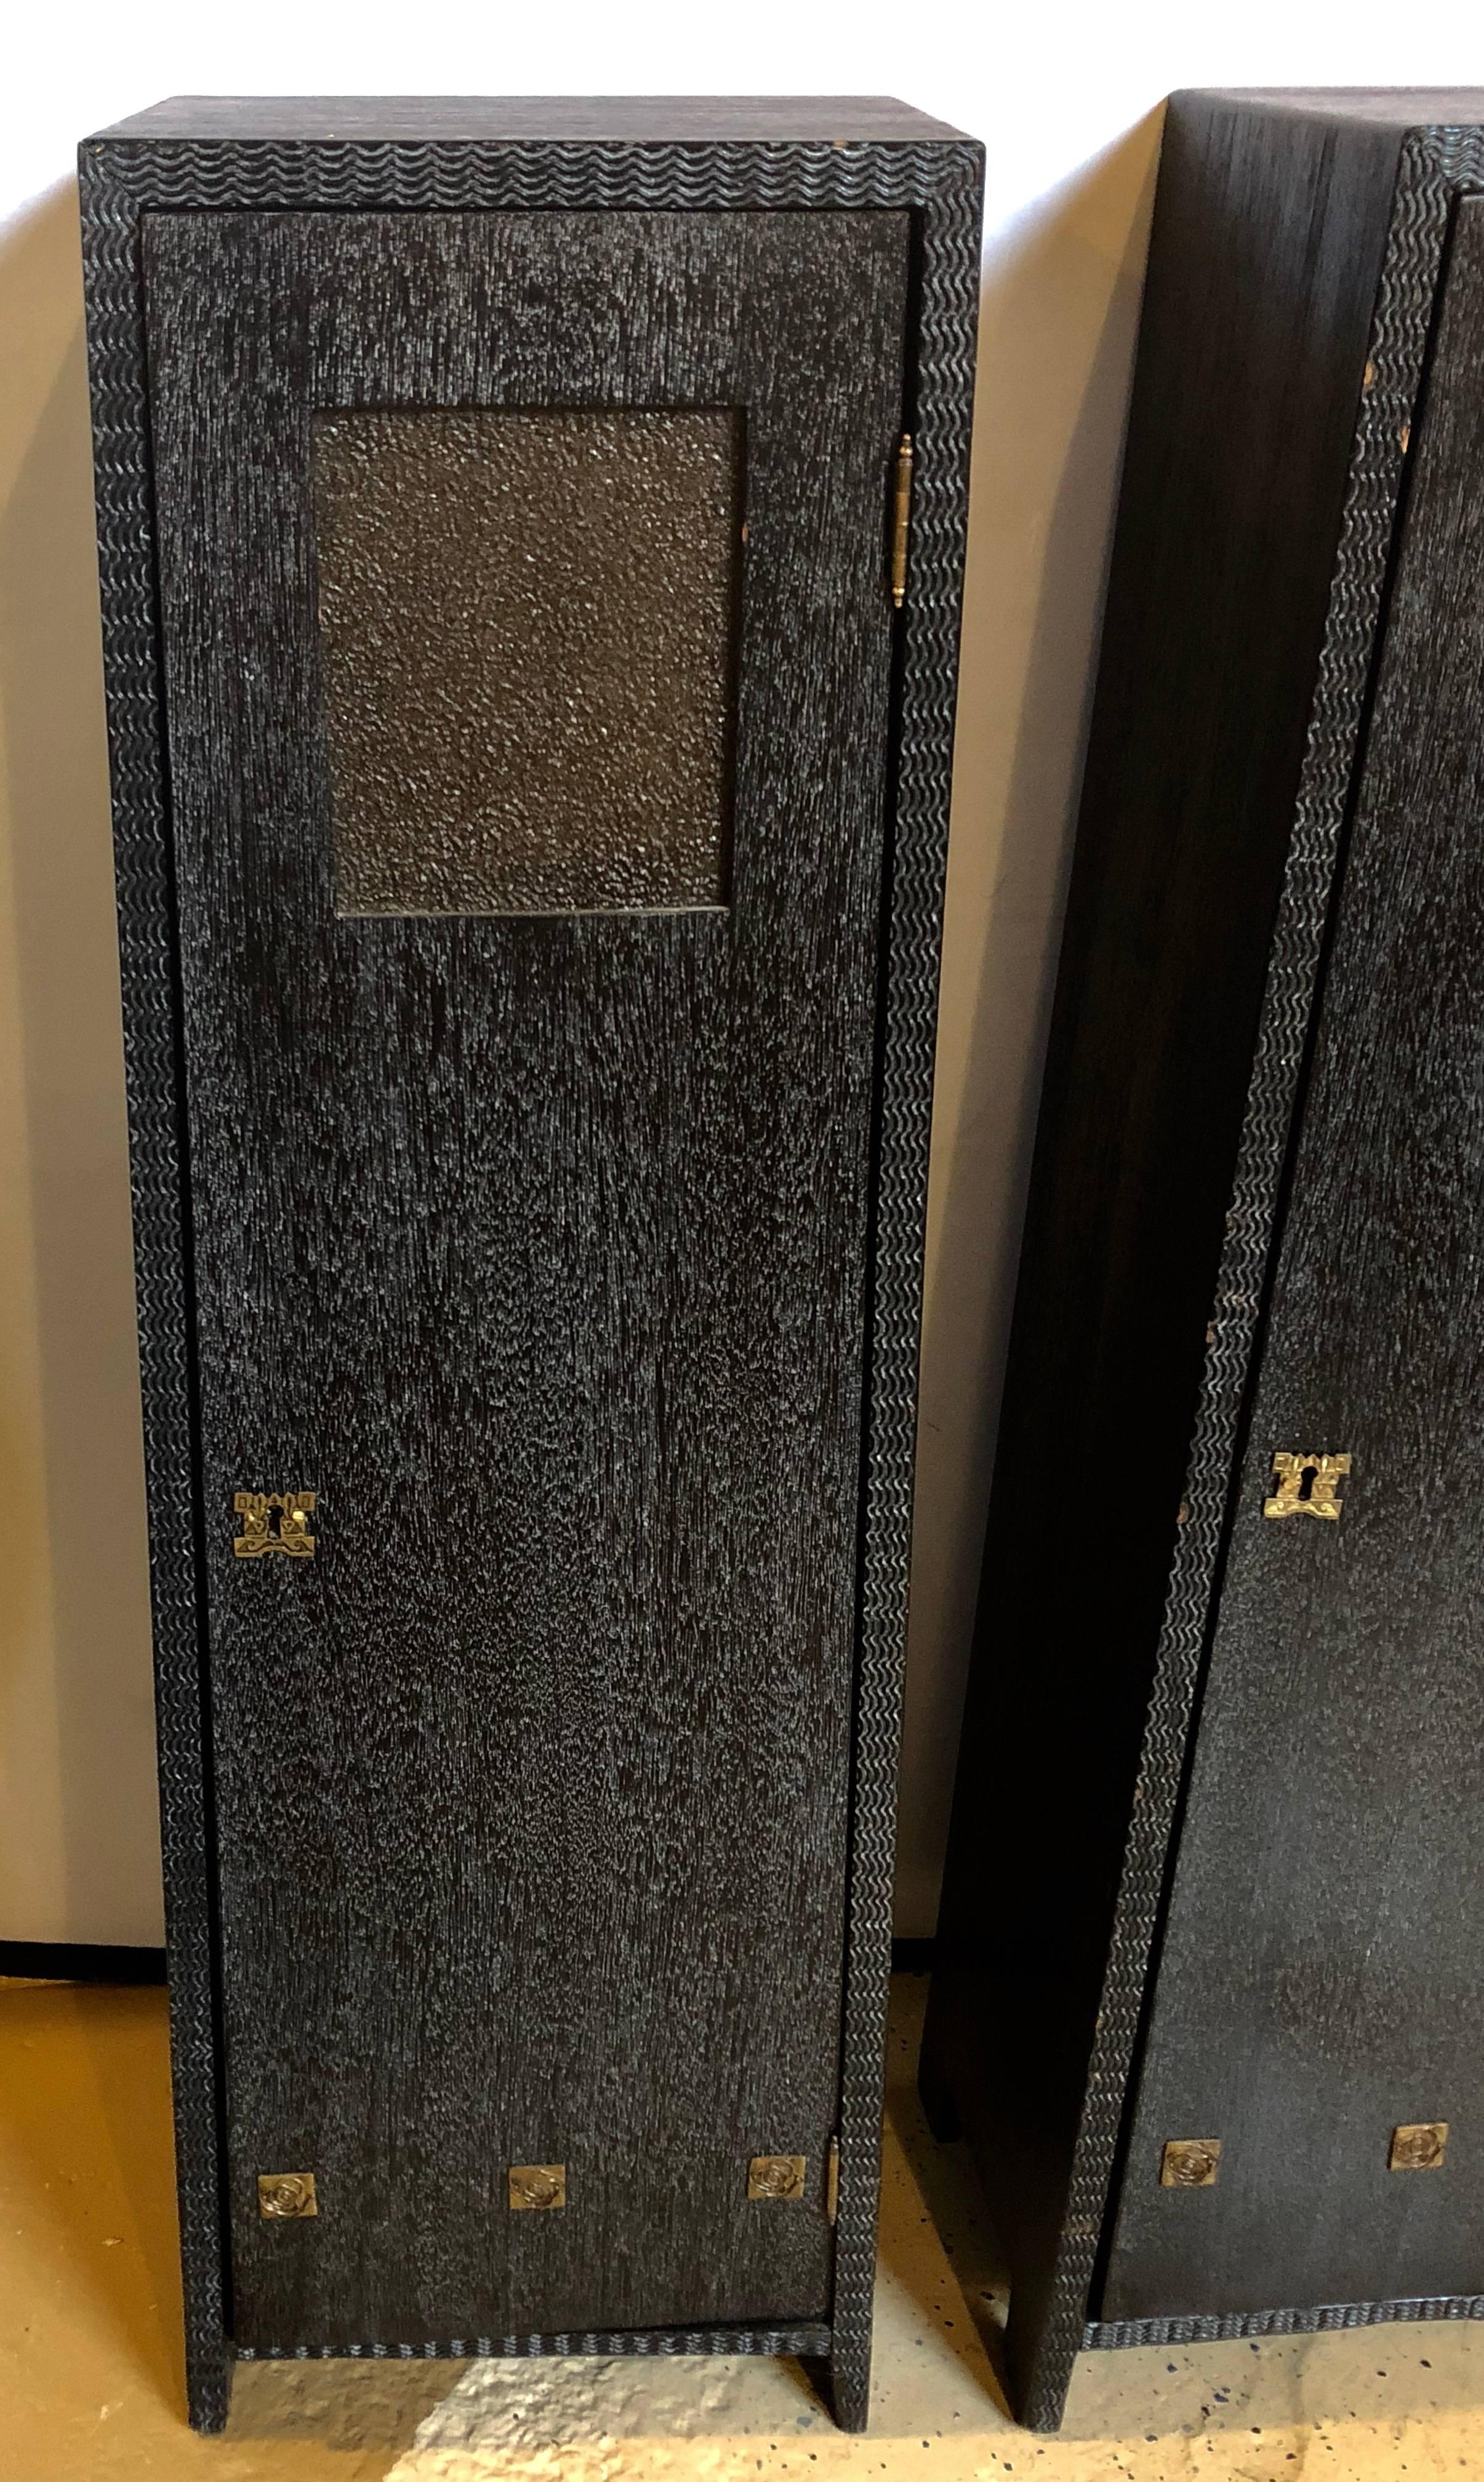 Pair of Art Deco style pedestal cabinets prov. Christies NYC (see sticker). Each pedestal opens to reveal storage. 

Ebonized Oak, Gilt Metal
20th C.